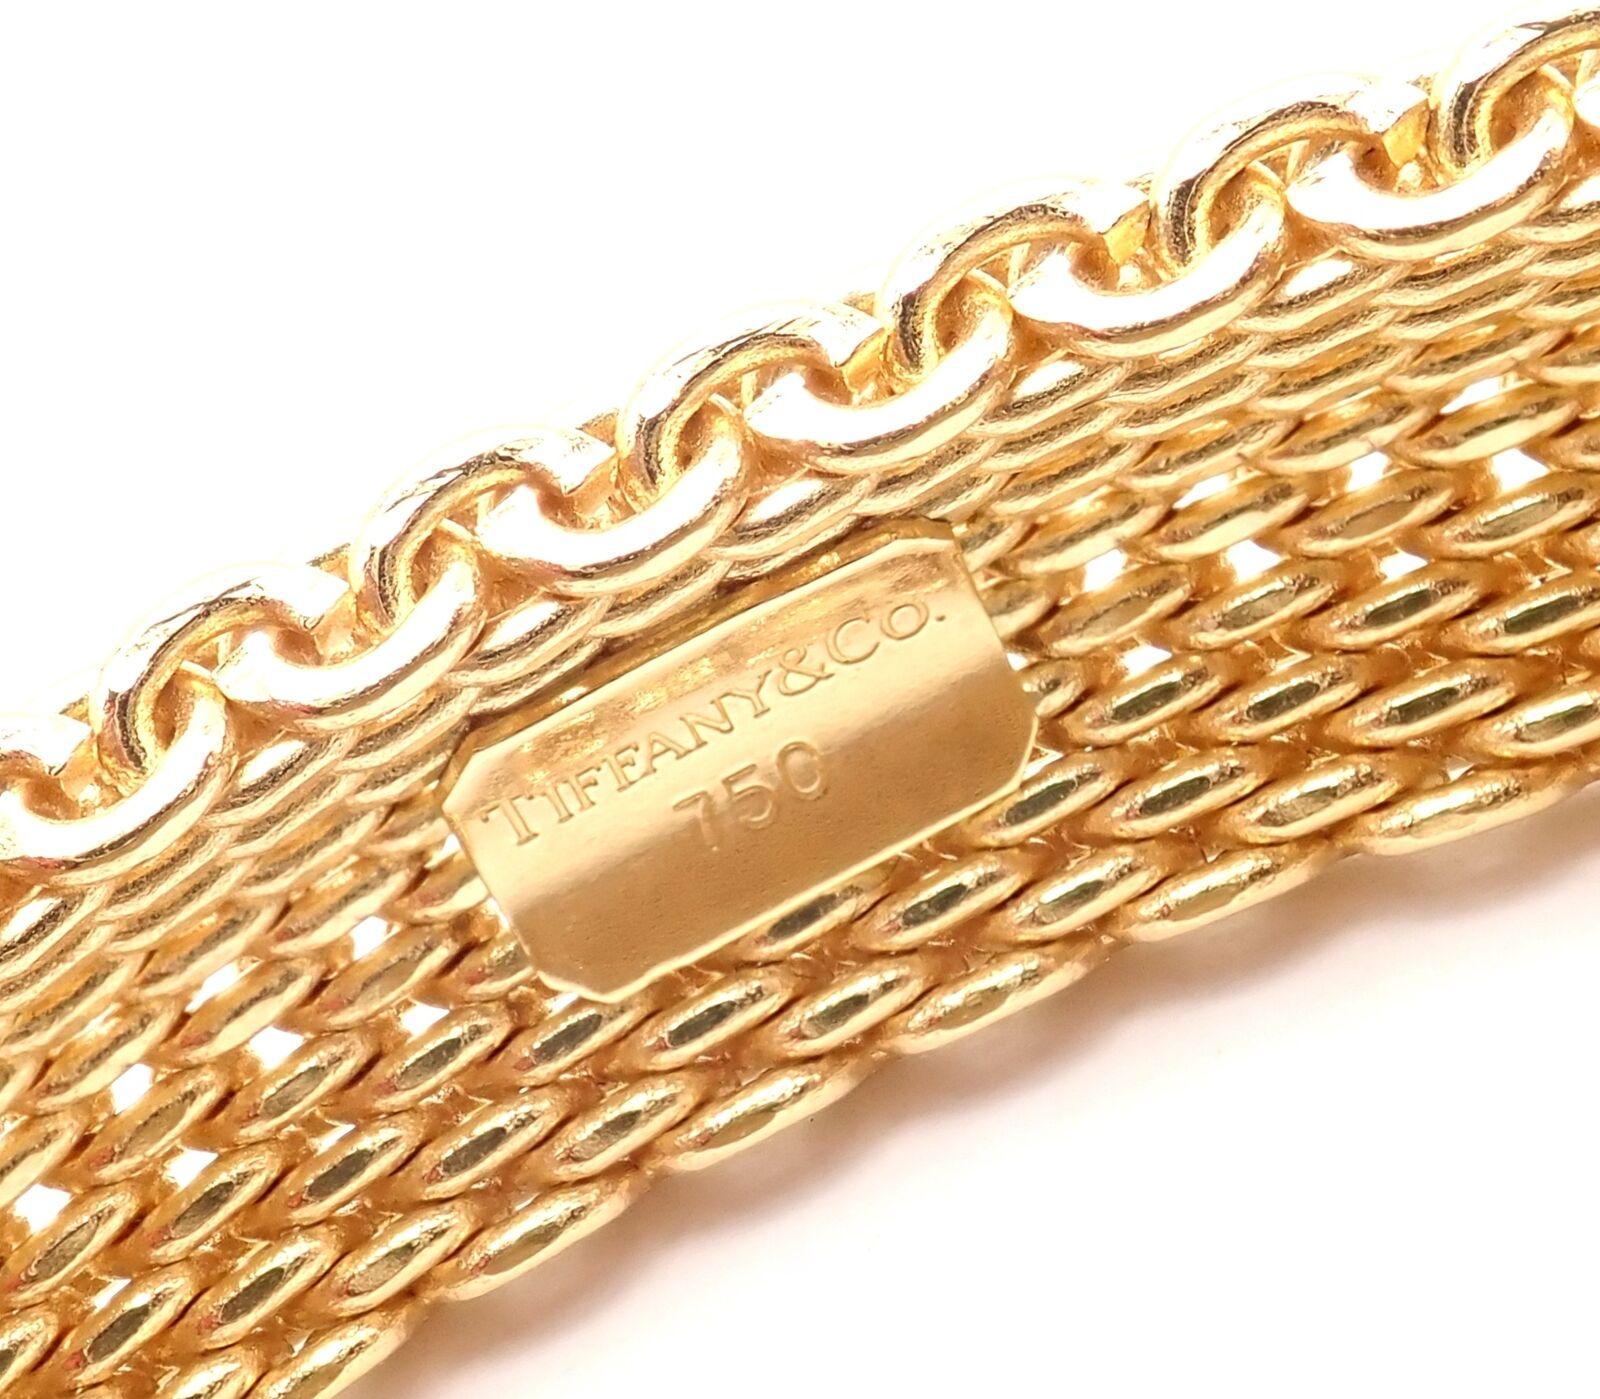 18k Yellow Gold Somerset Wide Mesh Bangle Bracelet by TIffany & Co. 
Details: 
Length: 7.5